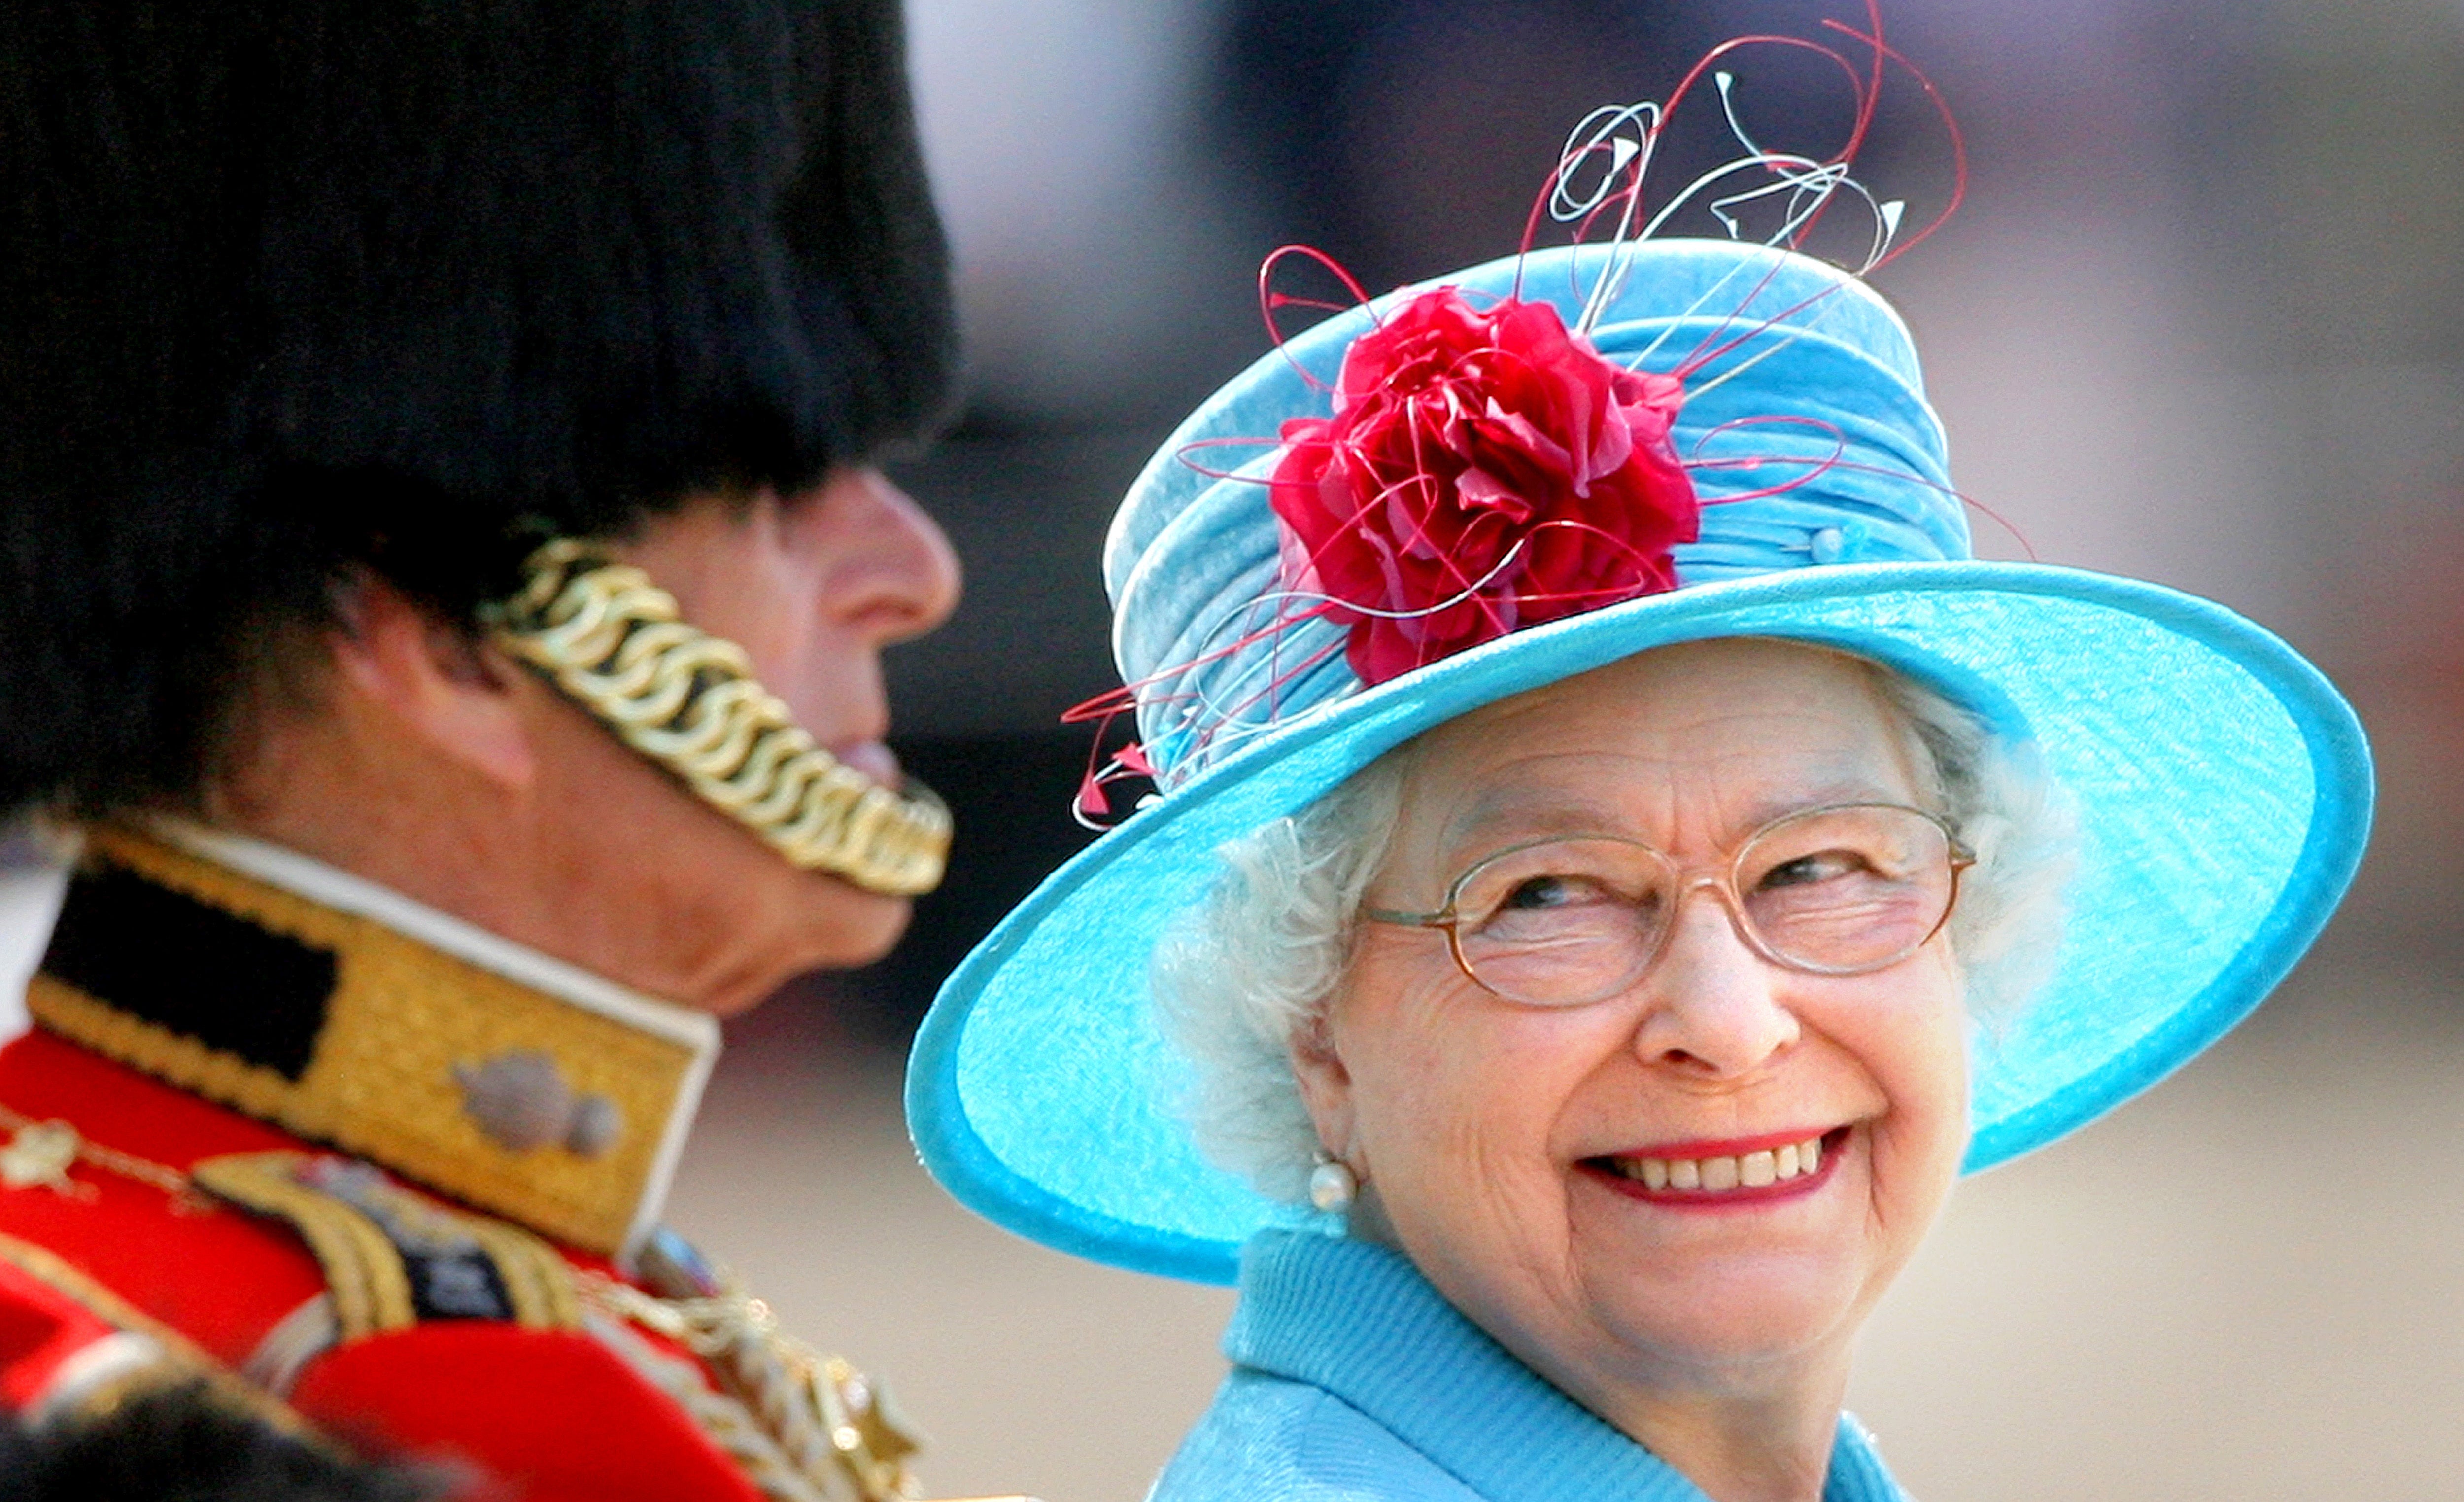 The Queen smiles at the Duke of Edinburgh on Horse Guards Parade during the annual Trooping the Colour parade (Lewis Whyld/PA)